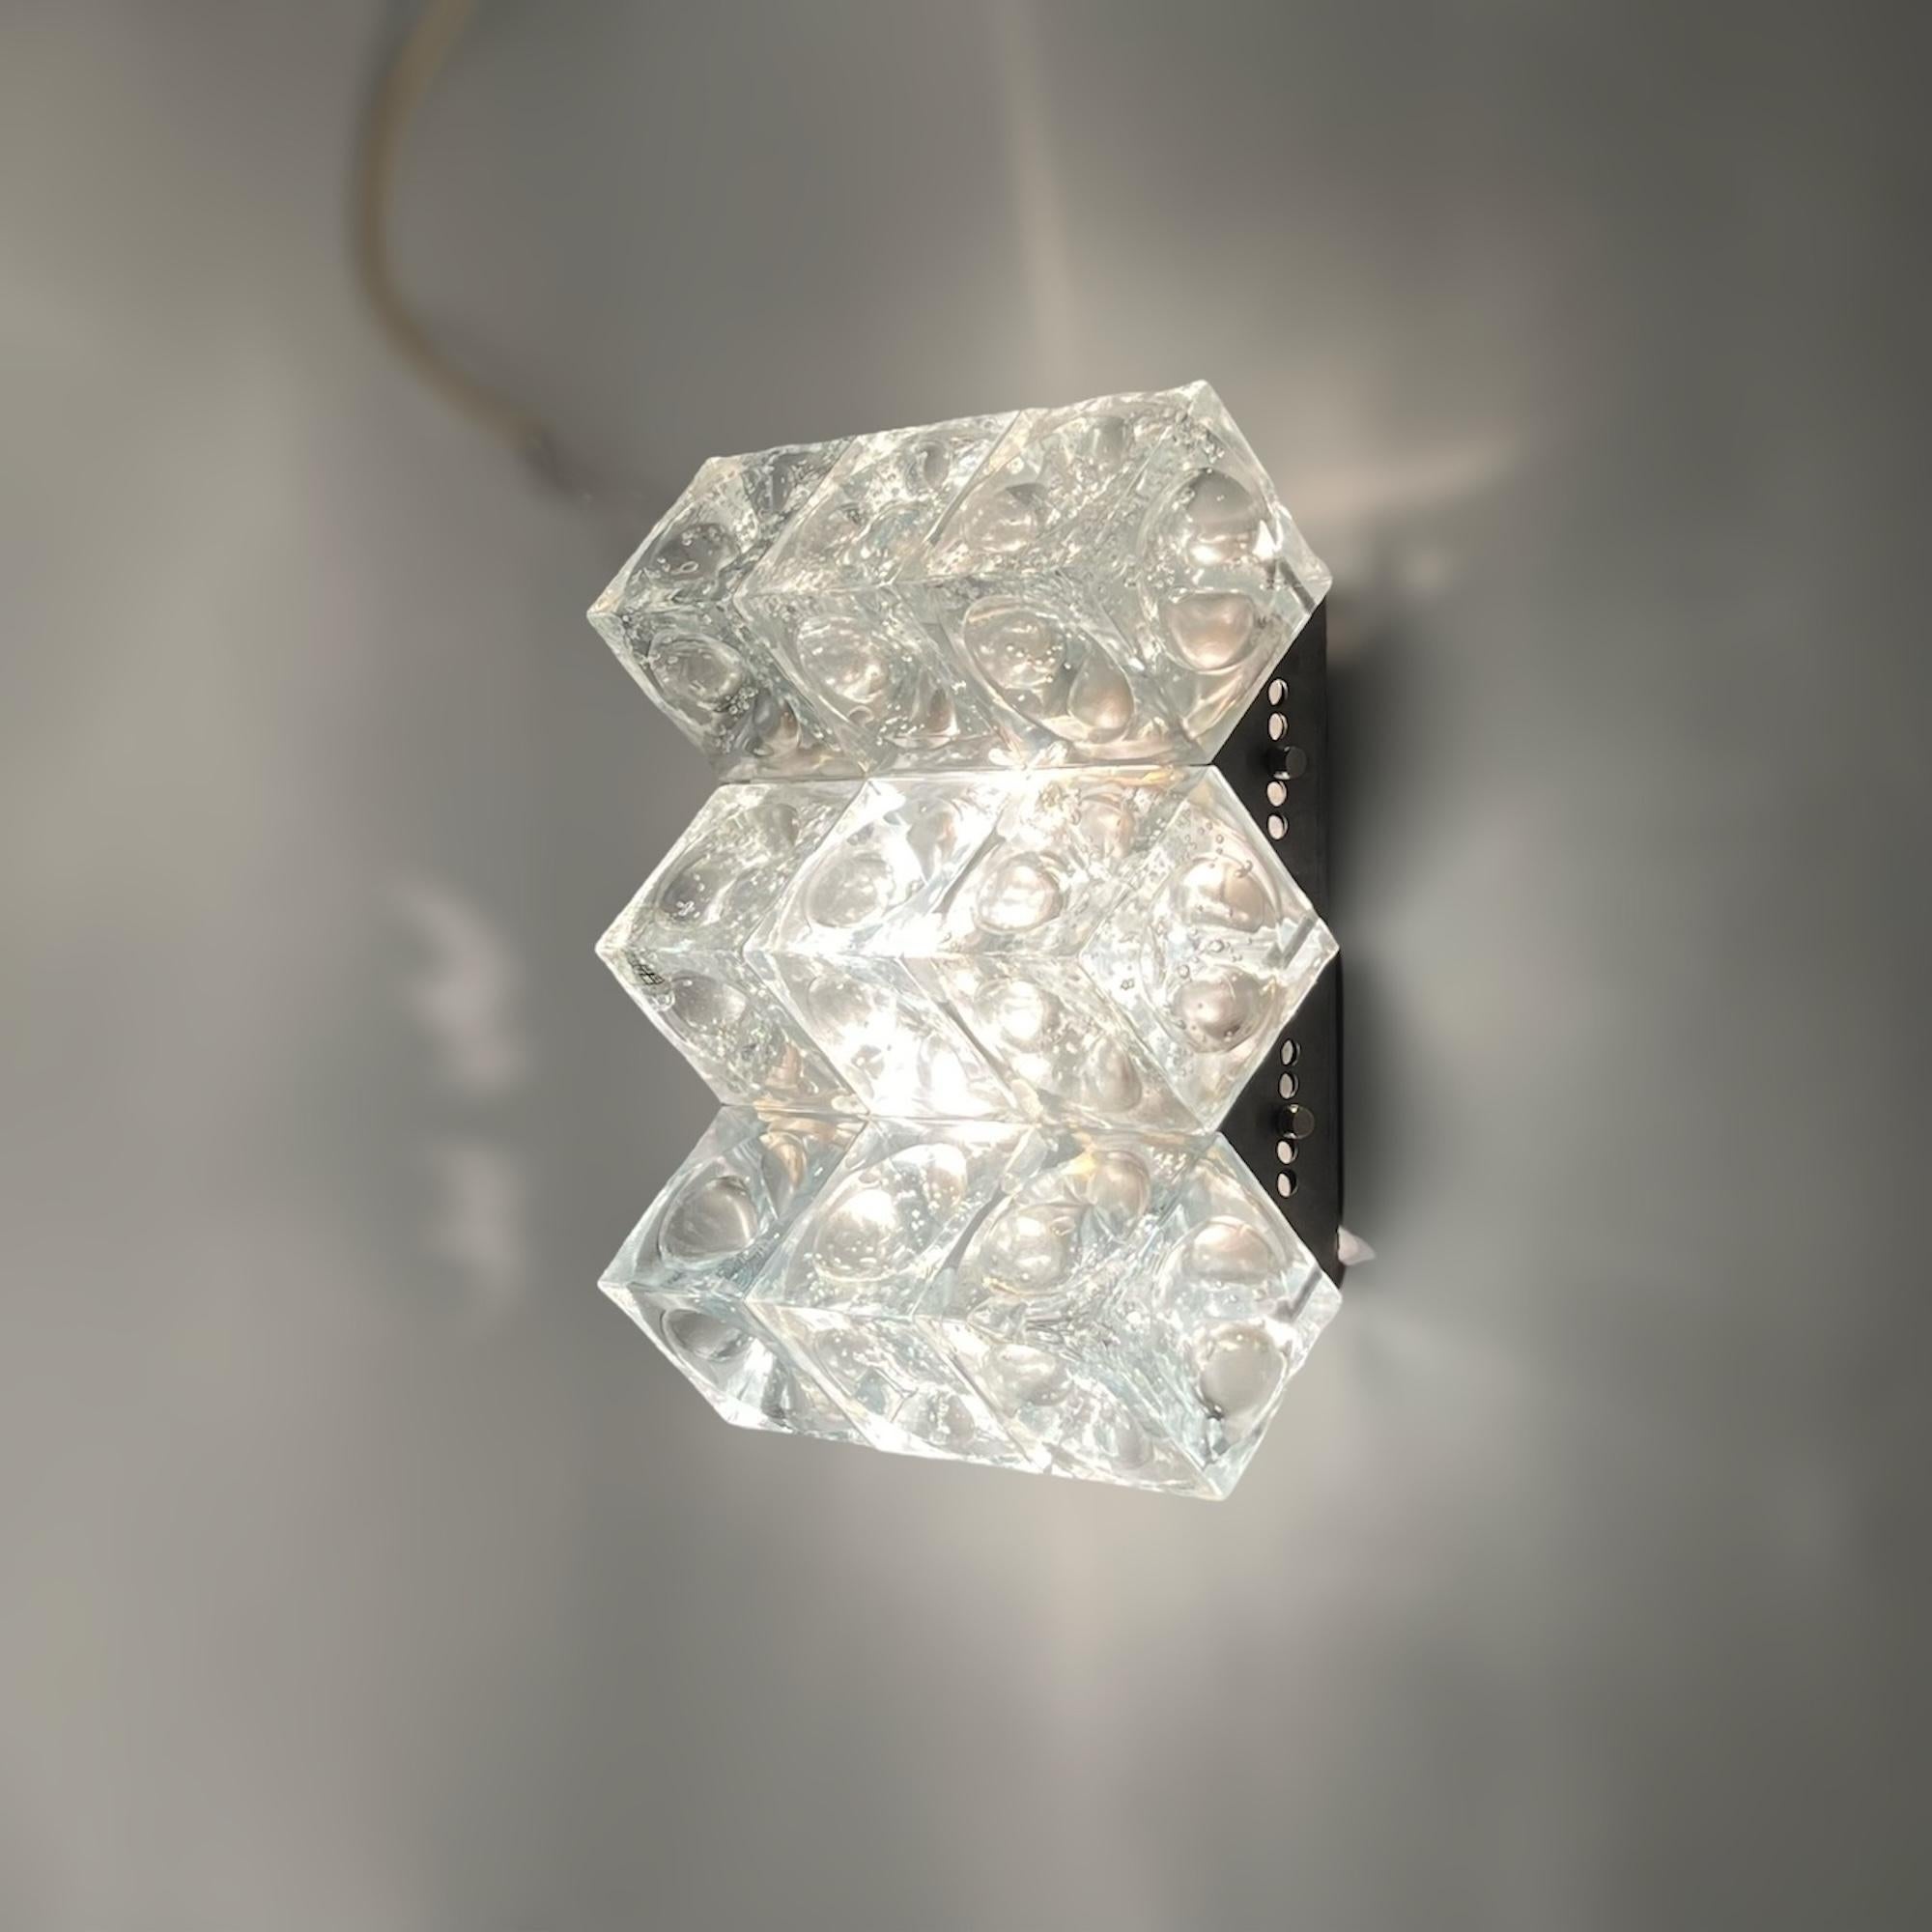 Poliarte Vintage Handmade Glass Sconce 'Cetusa', 1970s In Good Condition For Sale In San Benedetto Del Tronto, IT